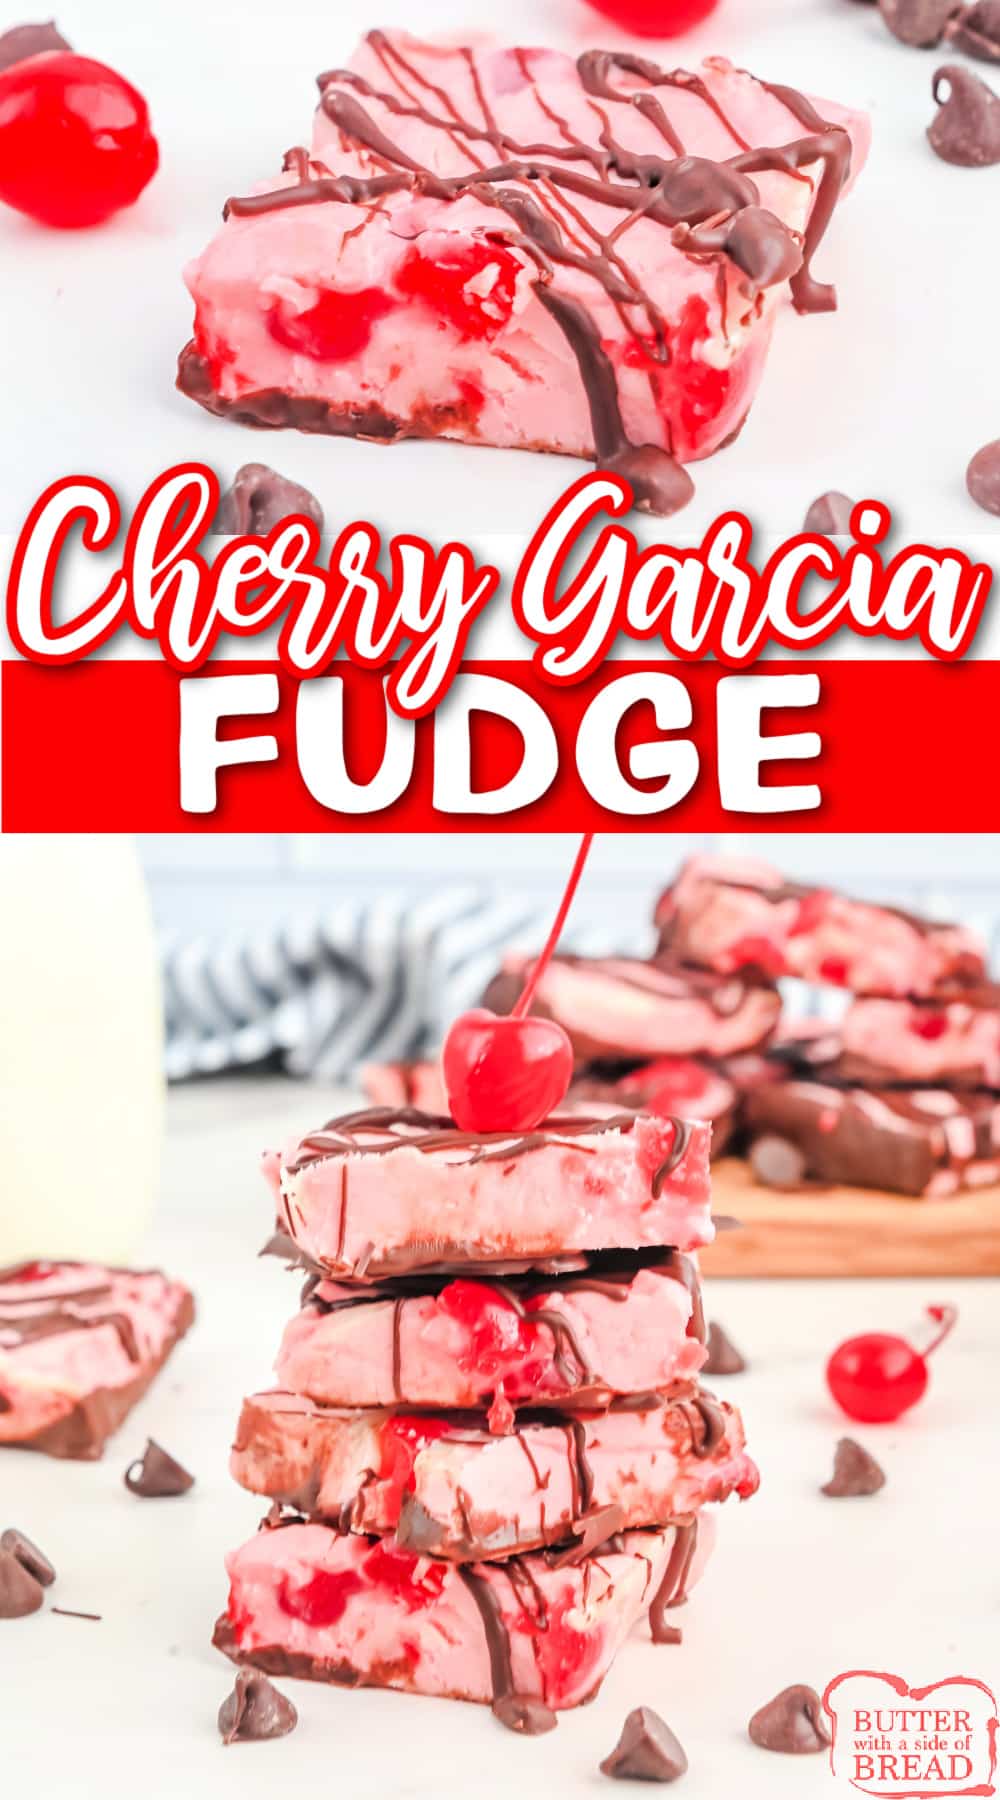 Cherry Garcia Fudge is rich, creamy and packed with cherries and chocolate! Delicious fudge recipe made with maraschino cherries, marshmallow cream, white chocolate chips and semi-sweet chocolate.